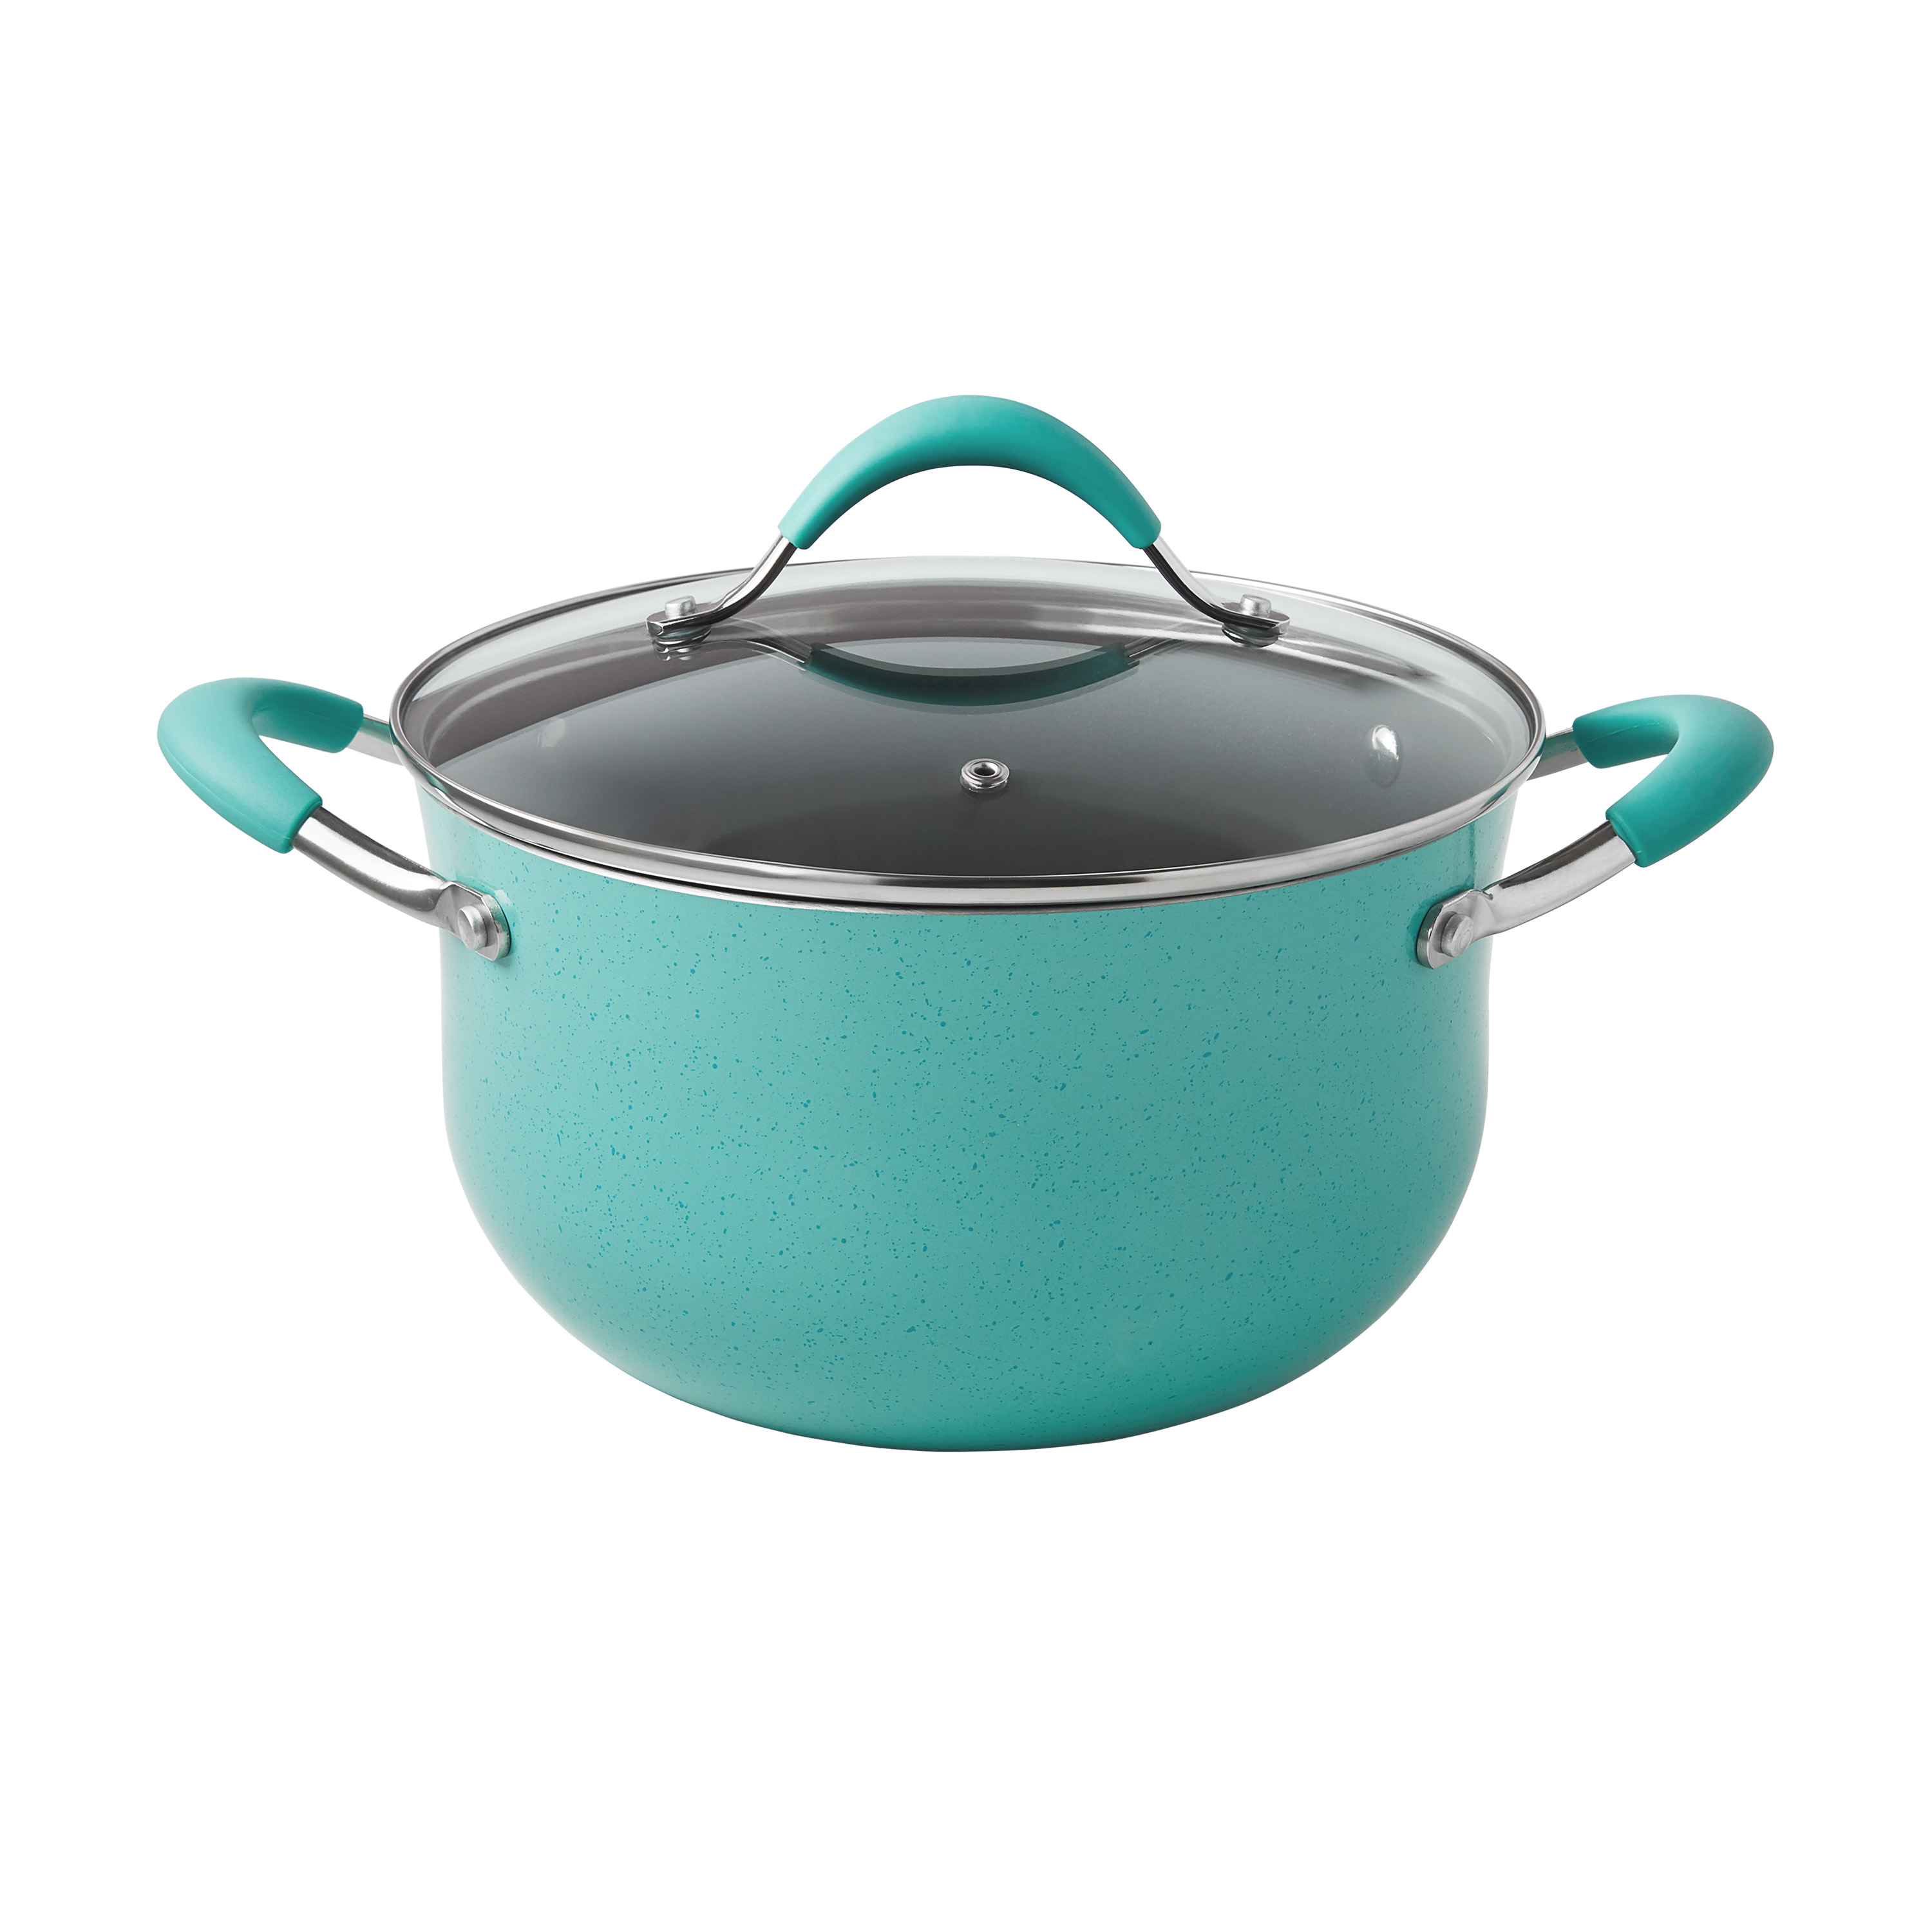 The Pioneer Woman Blooming Bouquet Aluminum Nonstick 19-Piece Cookware Set, Teal - image 2 of 11